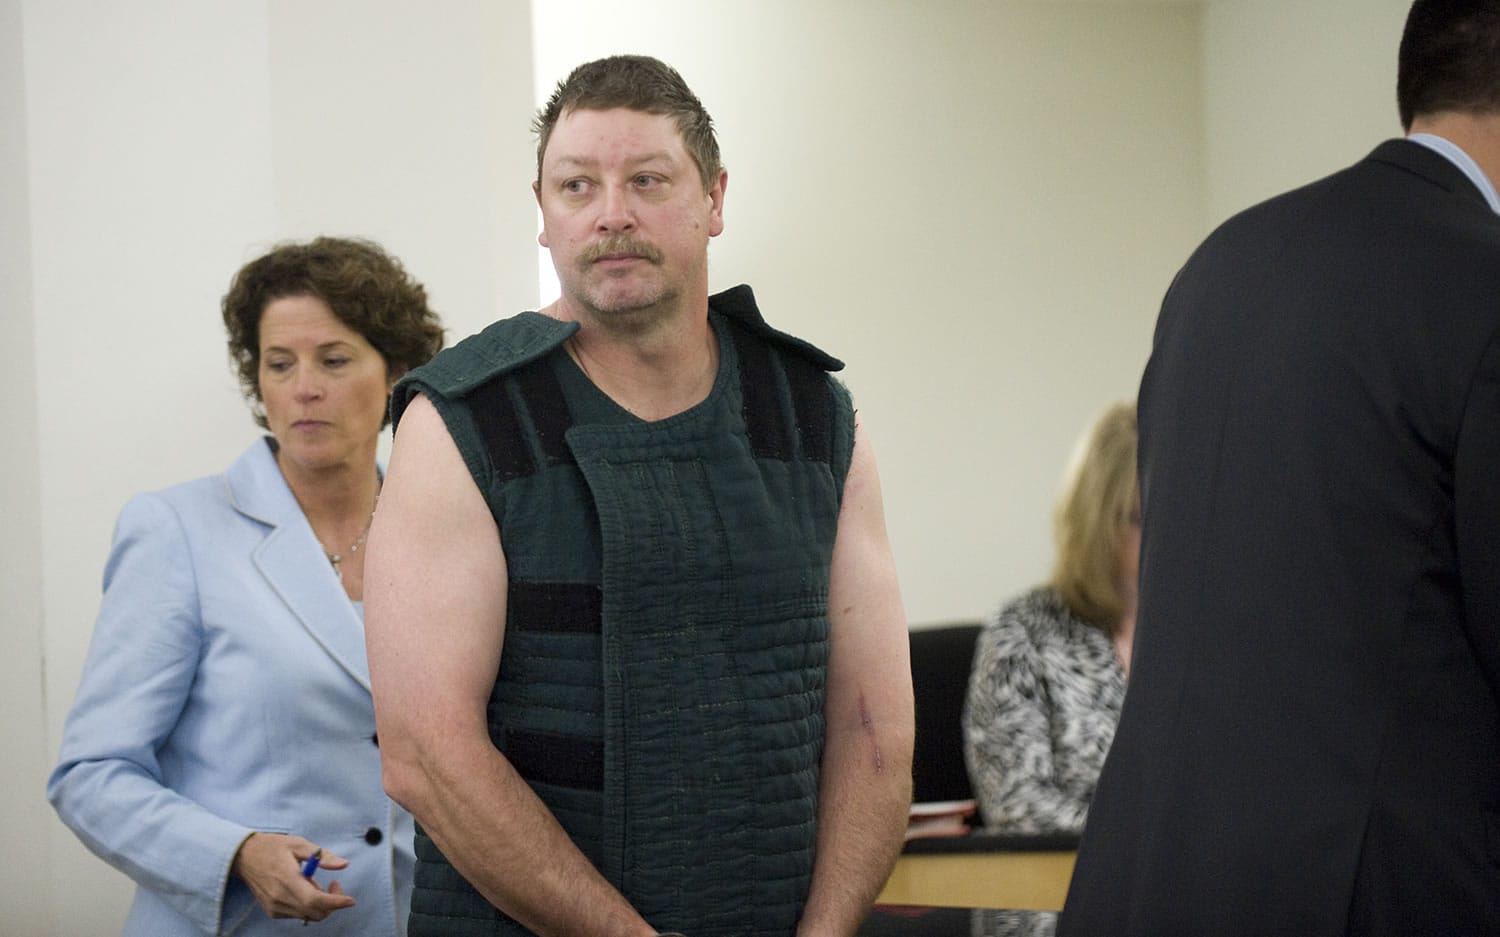 Dennis L. Wolter, charged with aggravated first-degree murder, is pictured here in May 2011.